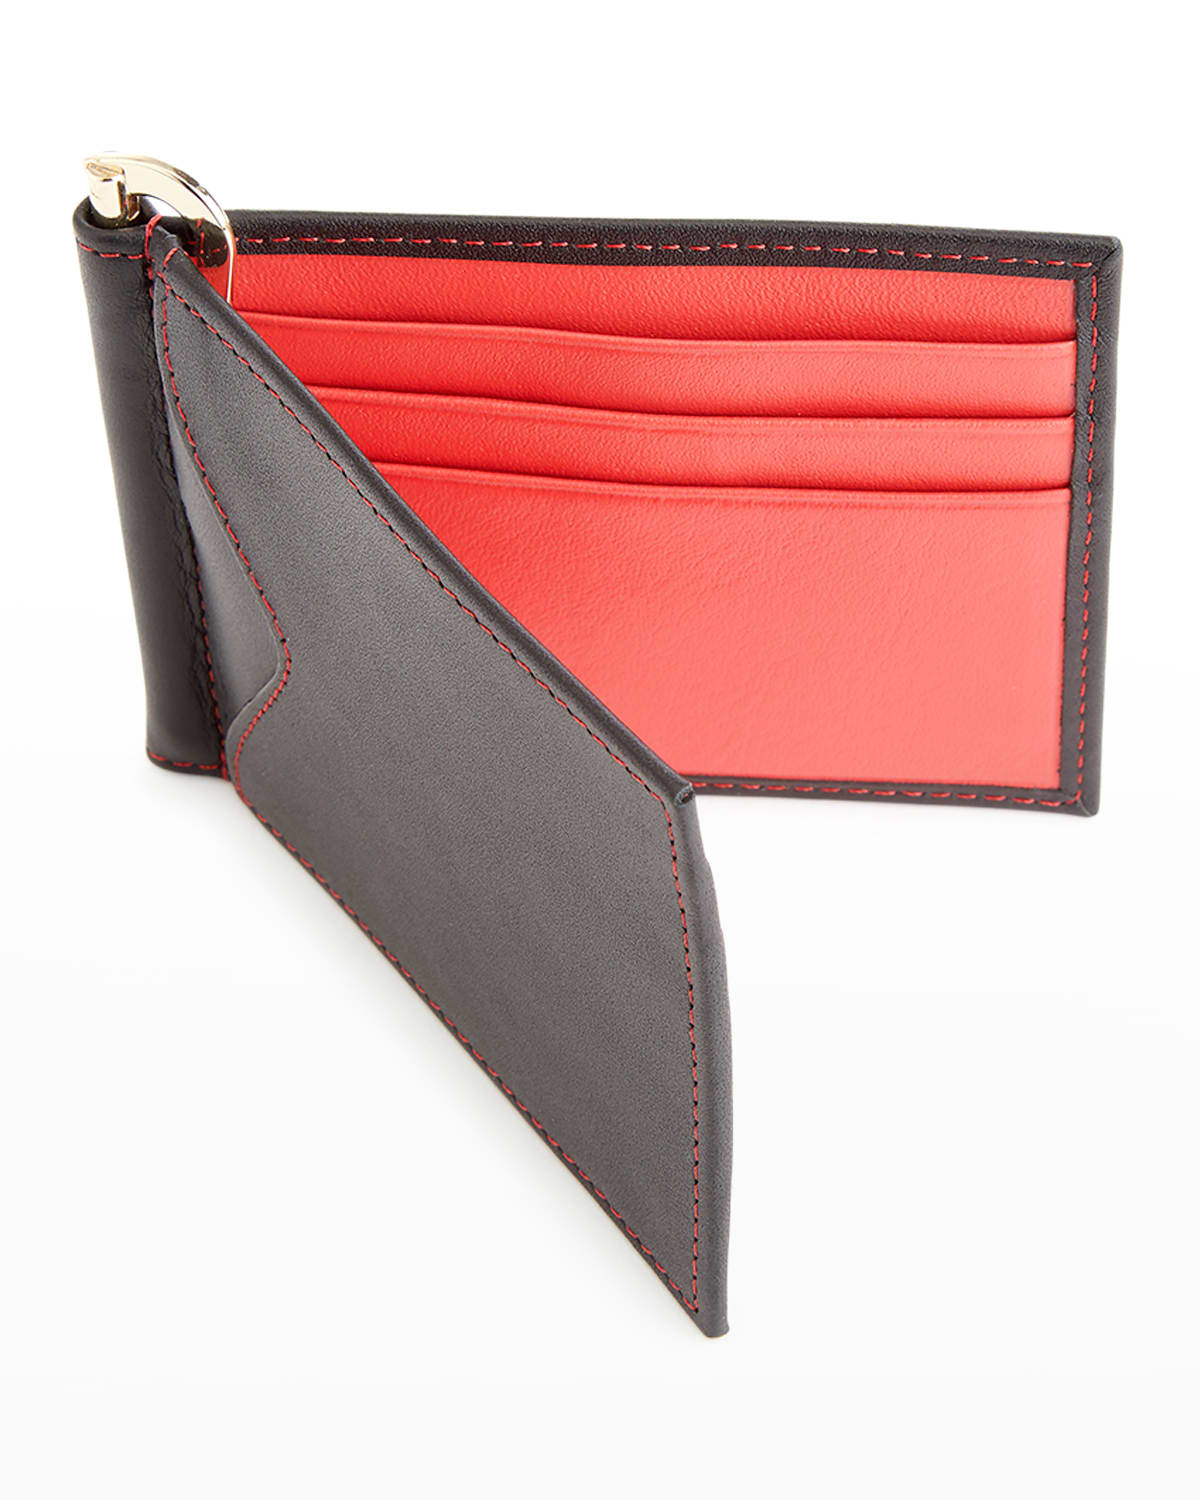 ROYCE NEW YORK PERSONALIZED LEATHER RFID-BLOCKING MONEY CLIP